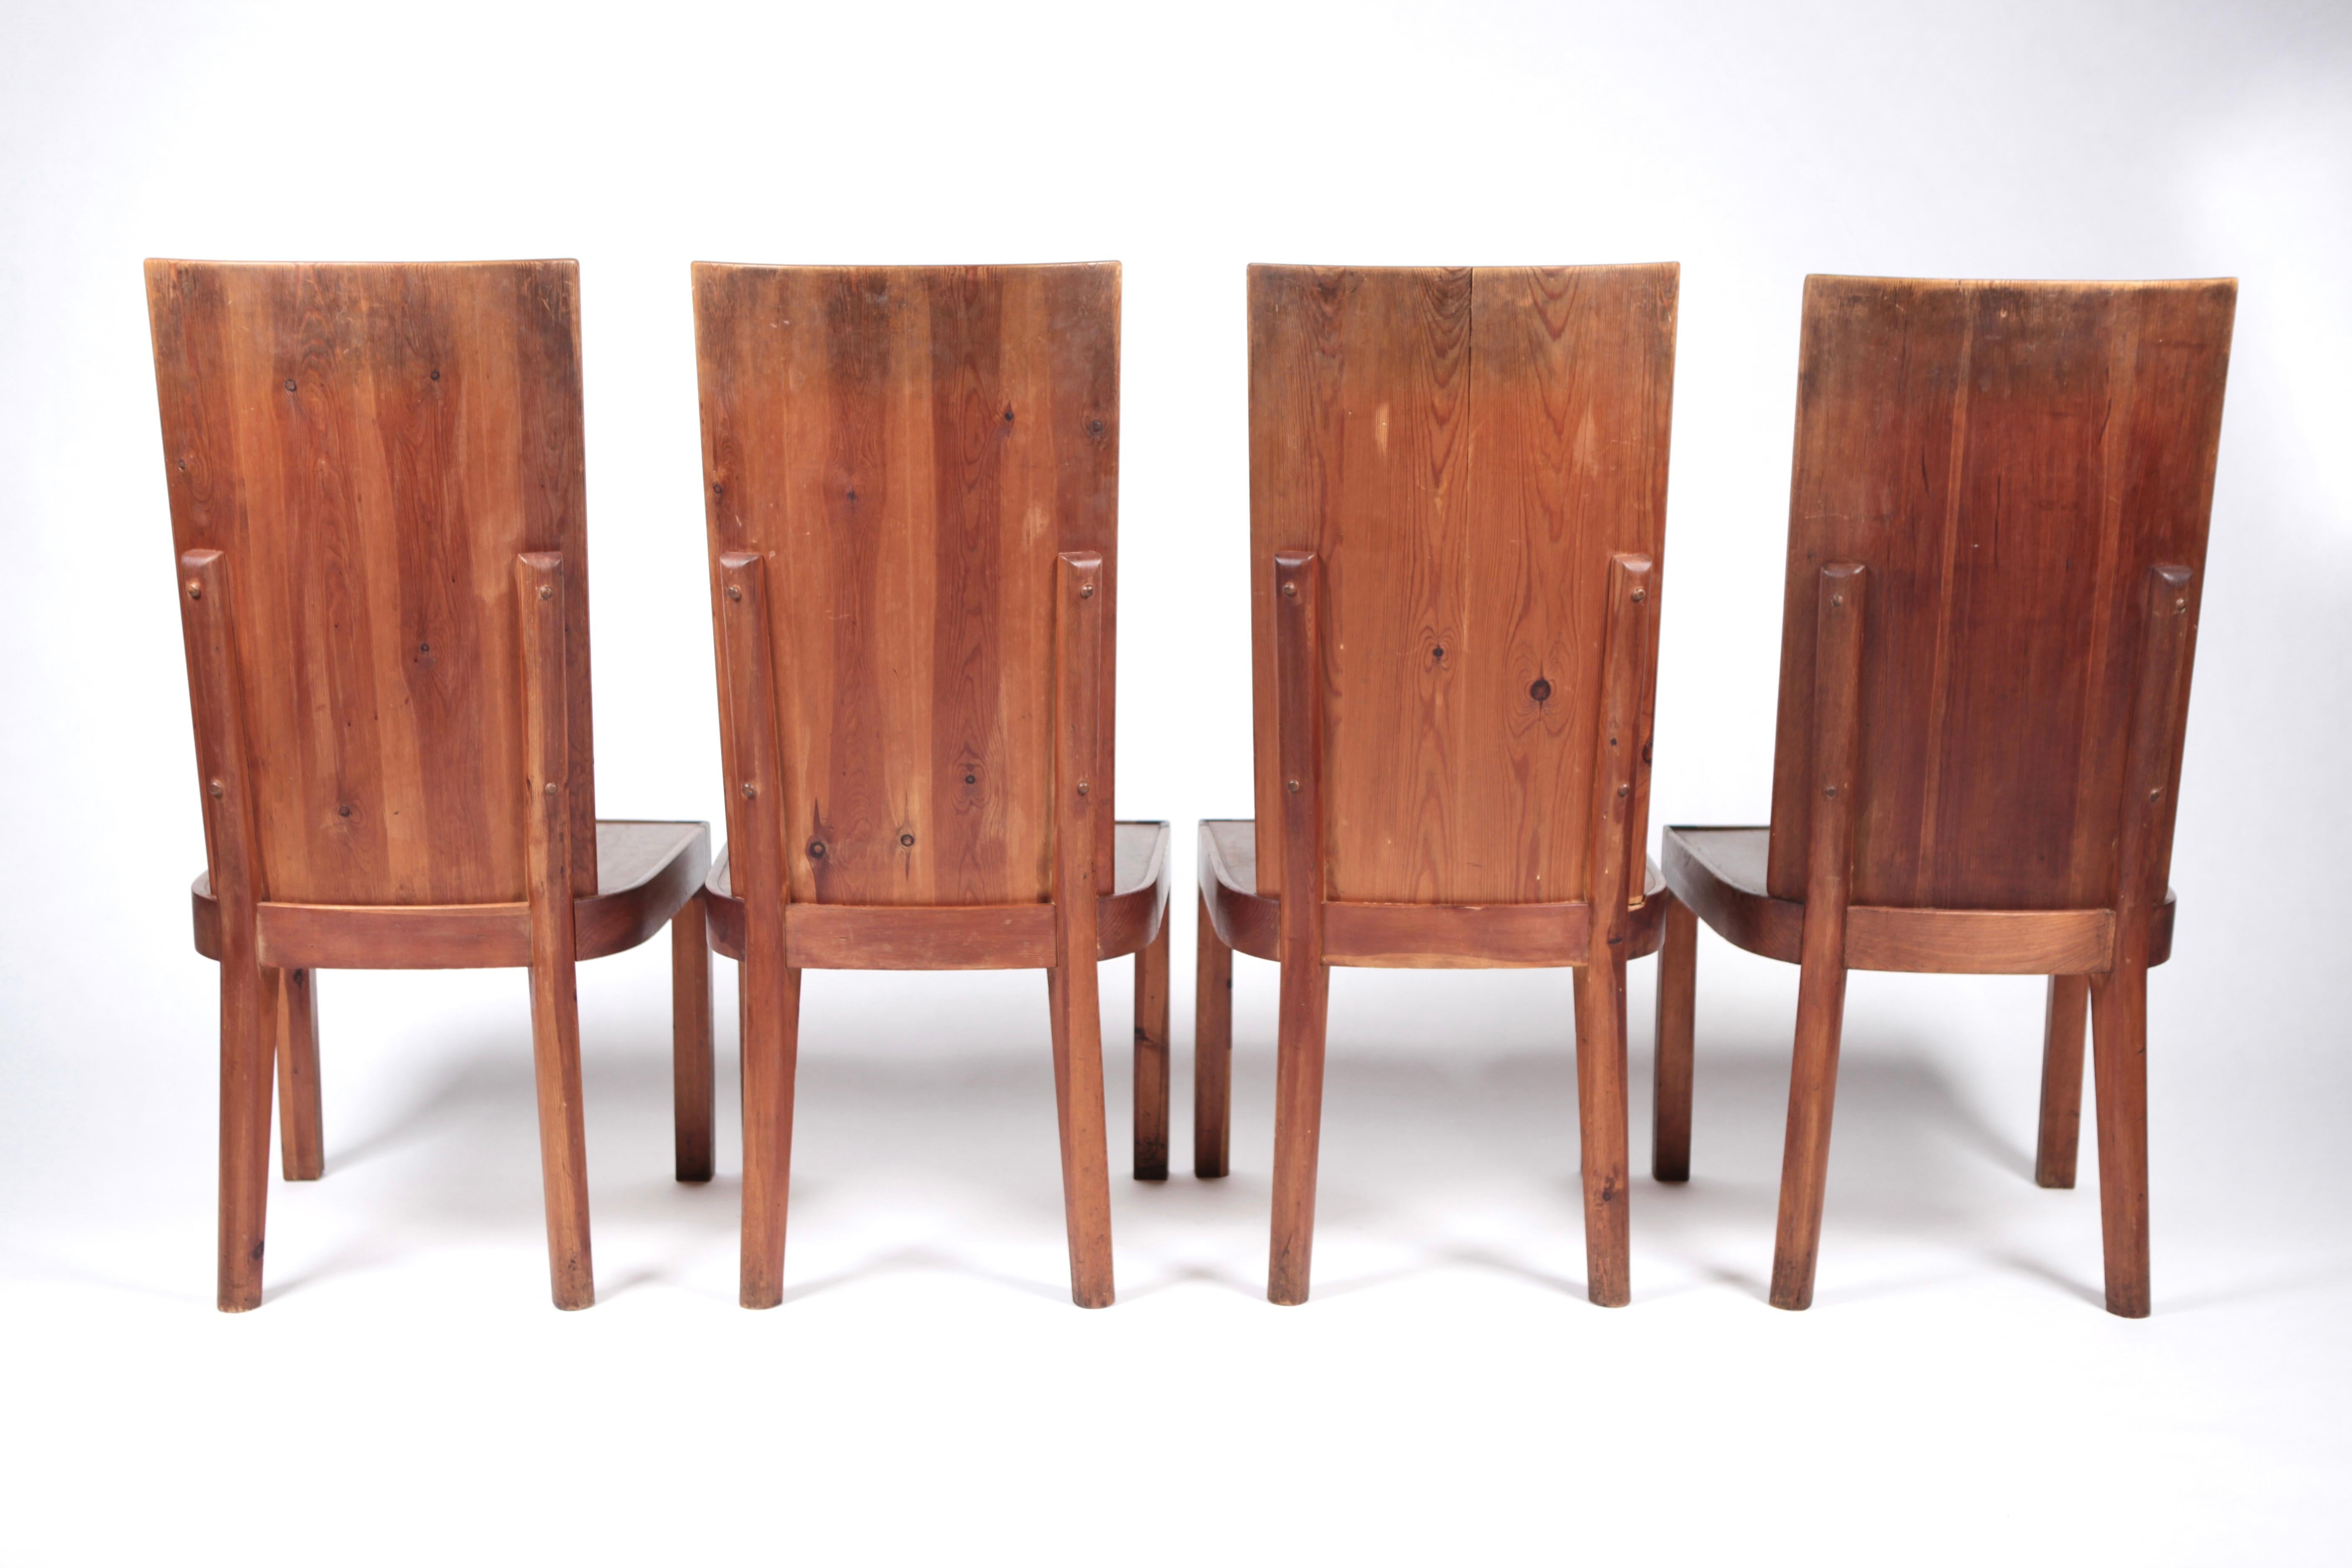 Set of 4 High Back Stained Pine Chairs, Attributed to Axel Einar Hjorth, Sweden  In Fair Condition For Sale In Berlin, DE